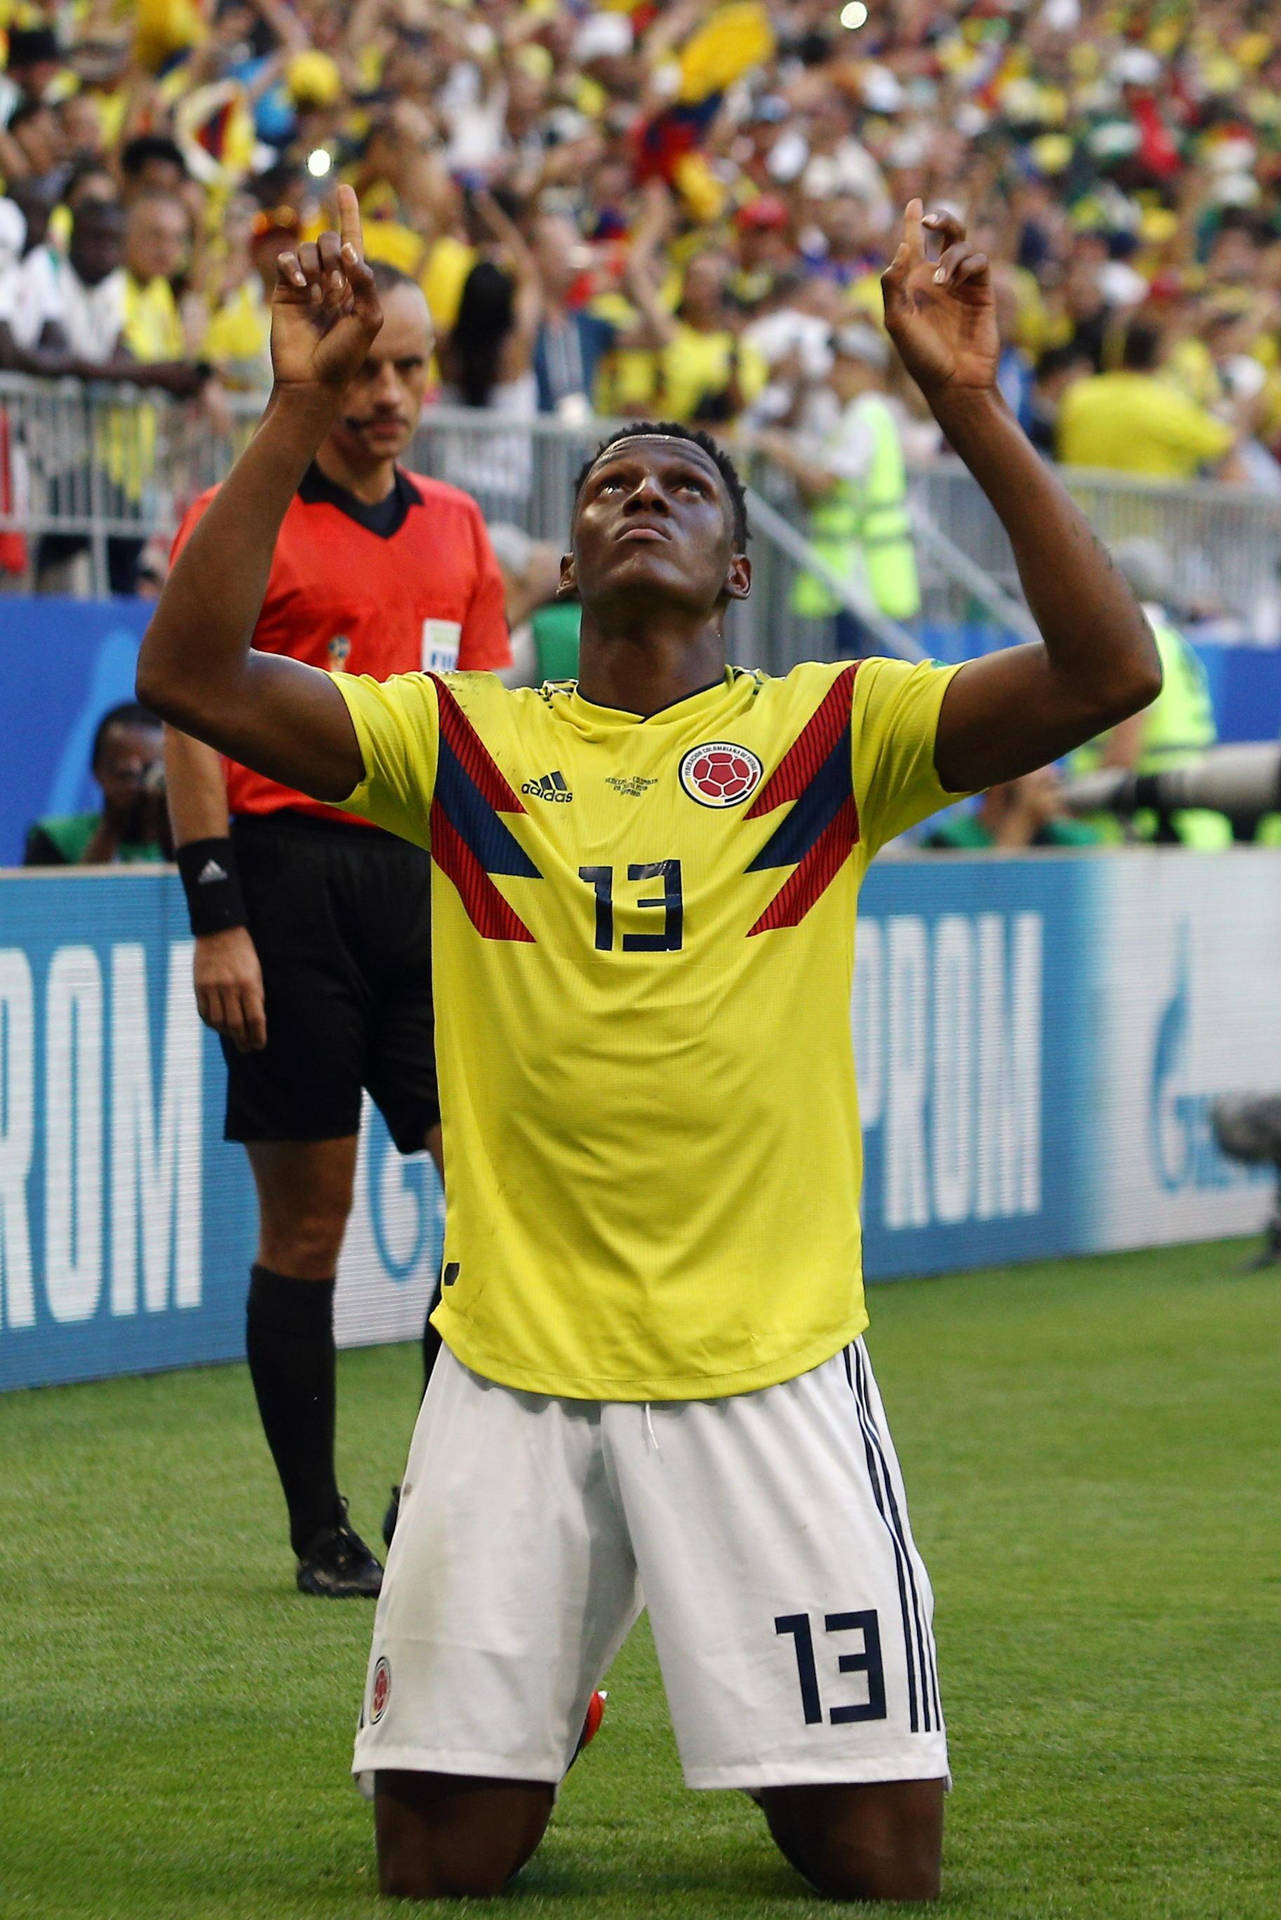 Yerrymina Pekar Och Tittar Upp. (this Sentence Can Be Used As A Description Of A Wallpaper Featuring Yerry Mina, Where He Is Pointing And Looking Up.) Wallpaper